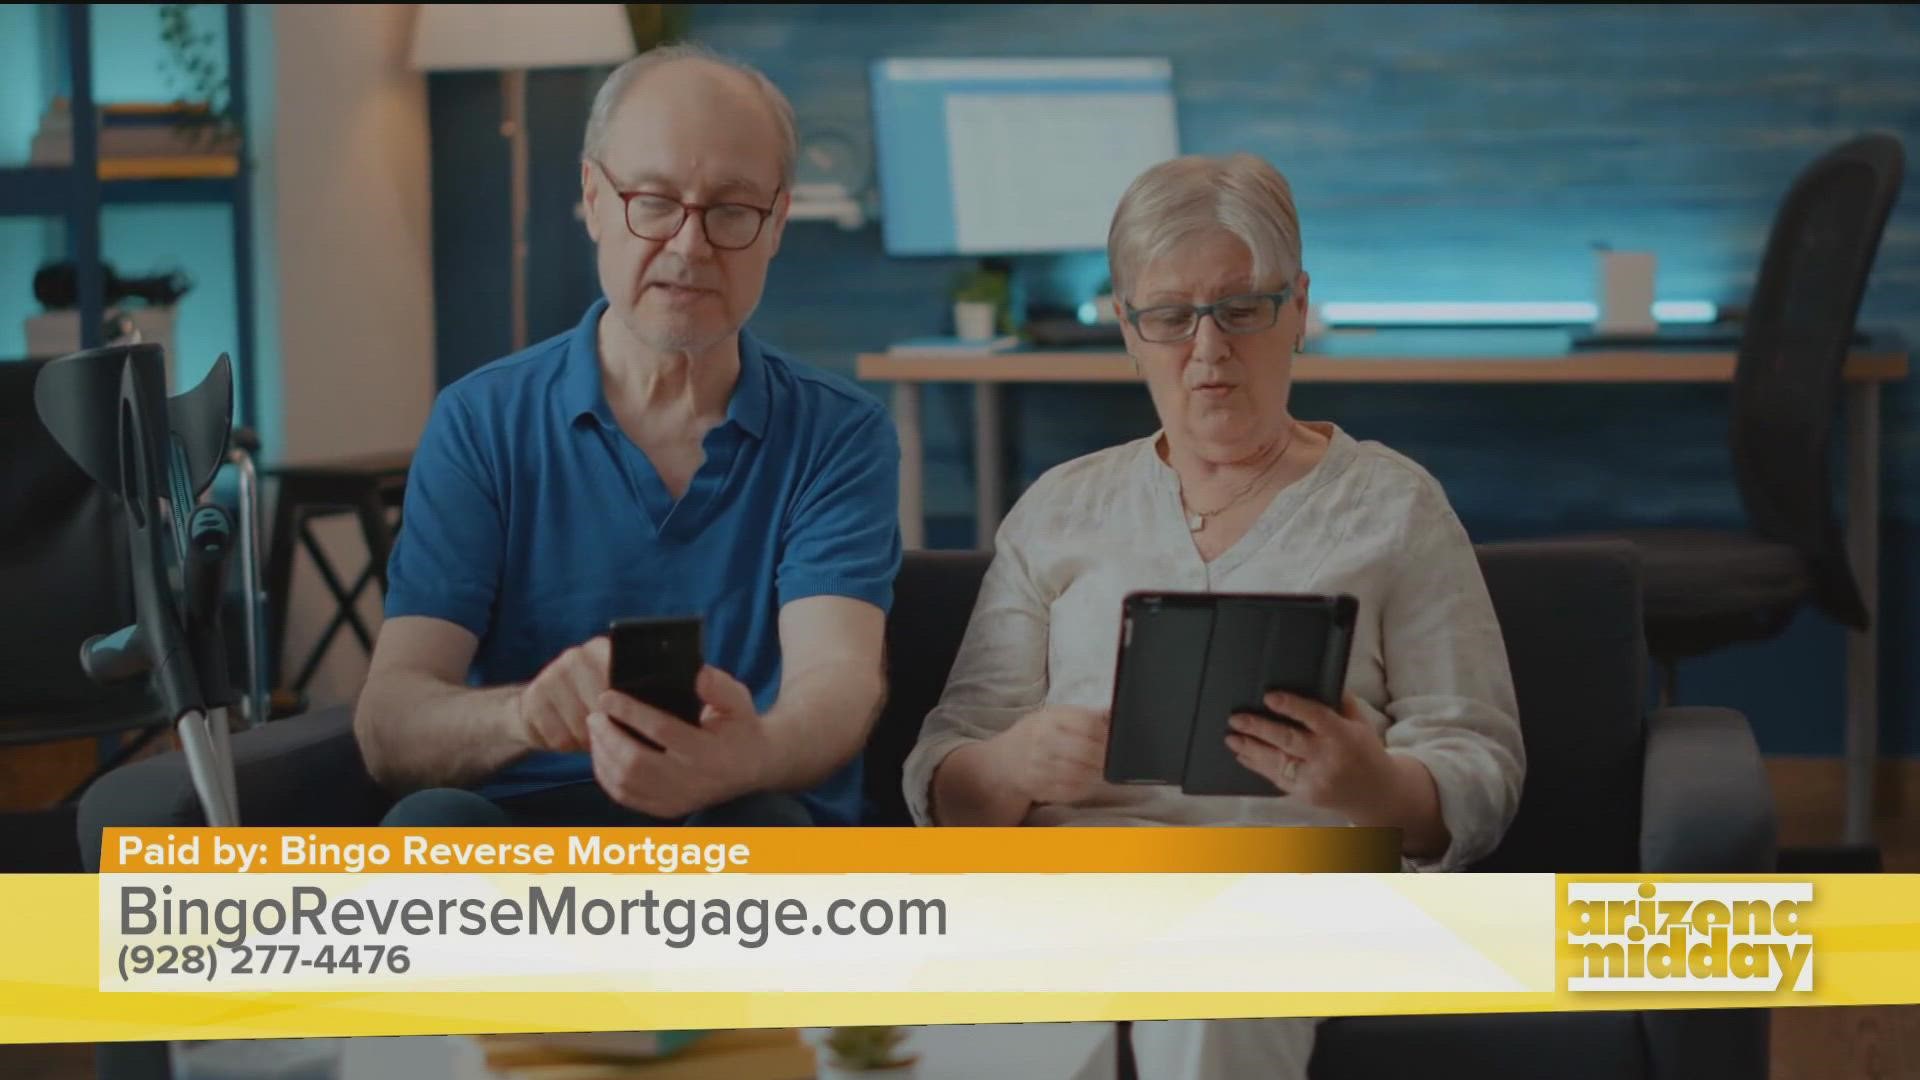 Bingo Reverse Mortgage specialist Holly Wilbur breaks down how a reverse mortgage can help give those 55 and older a financial peace of mind.